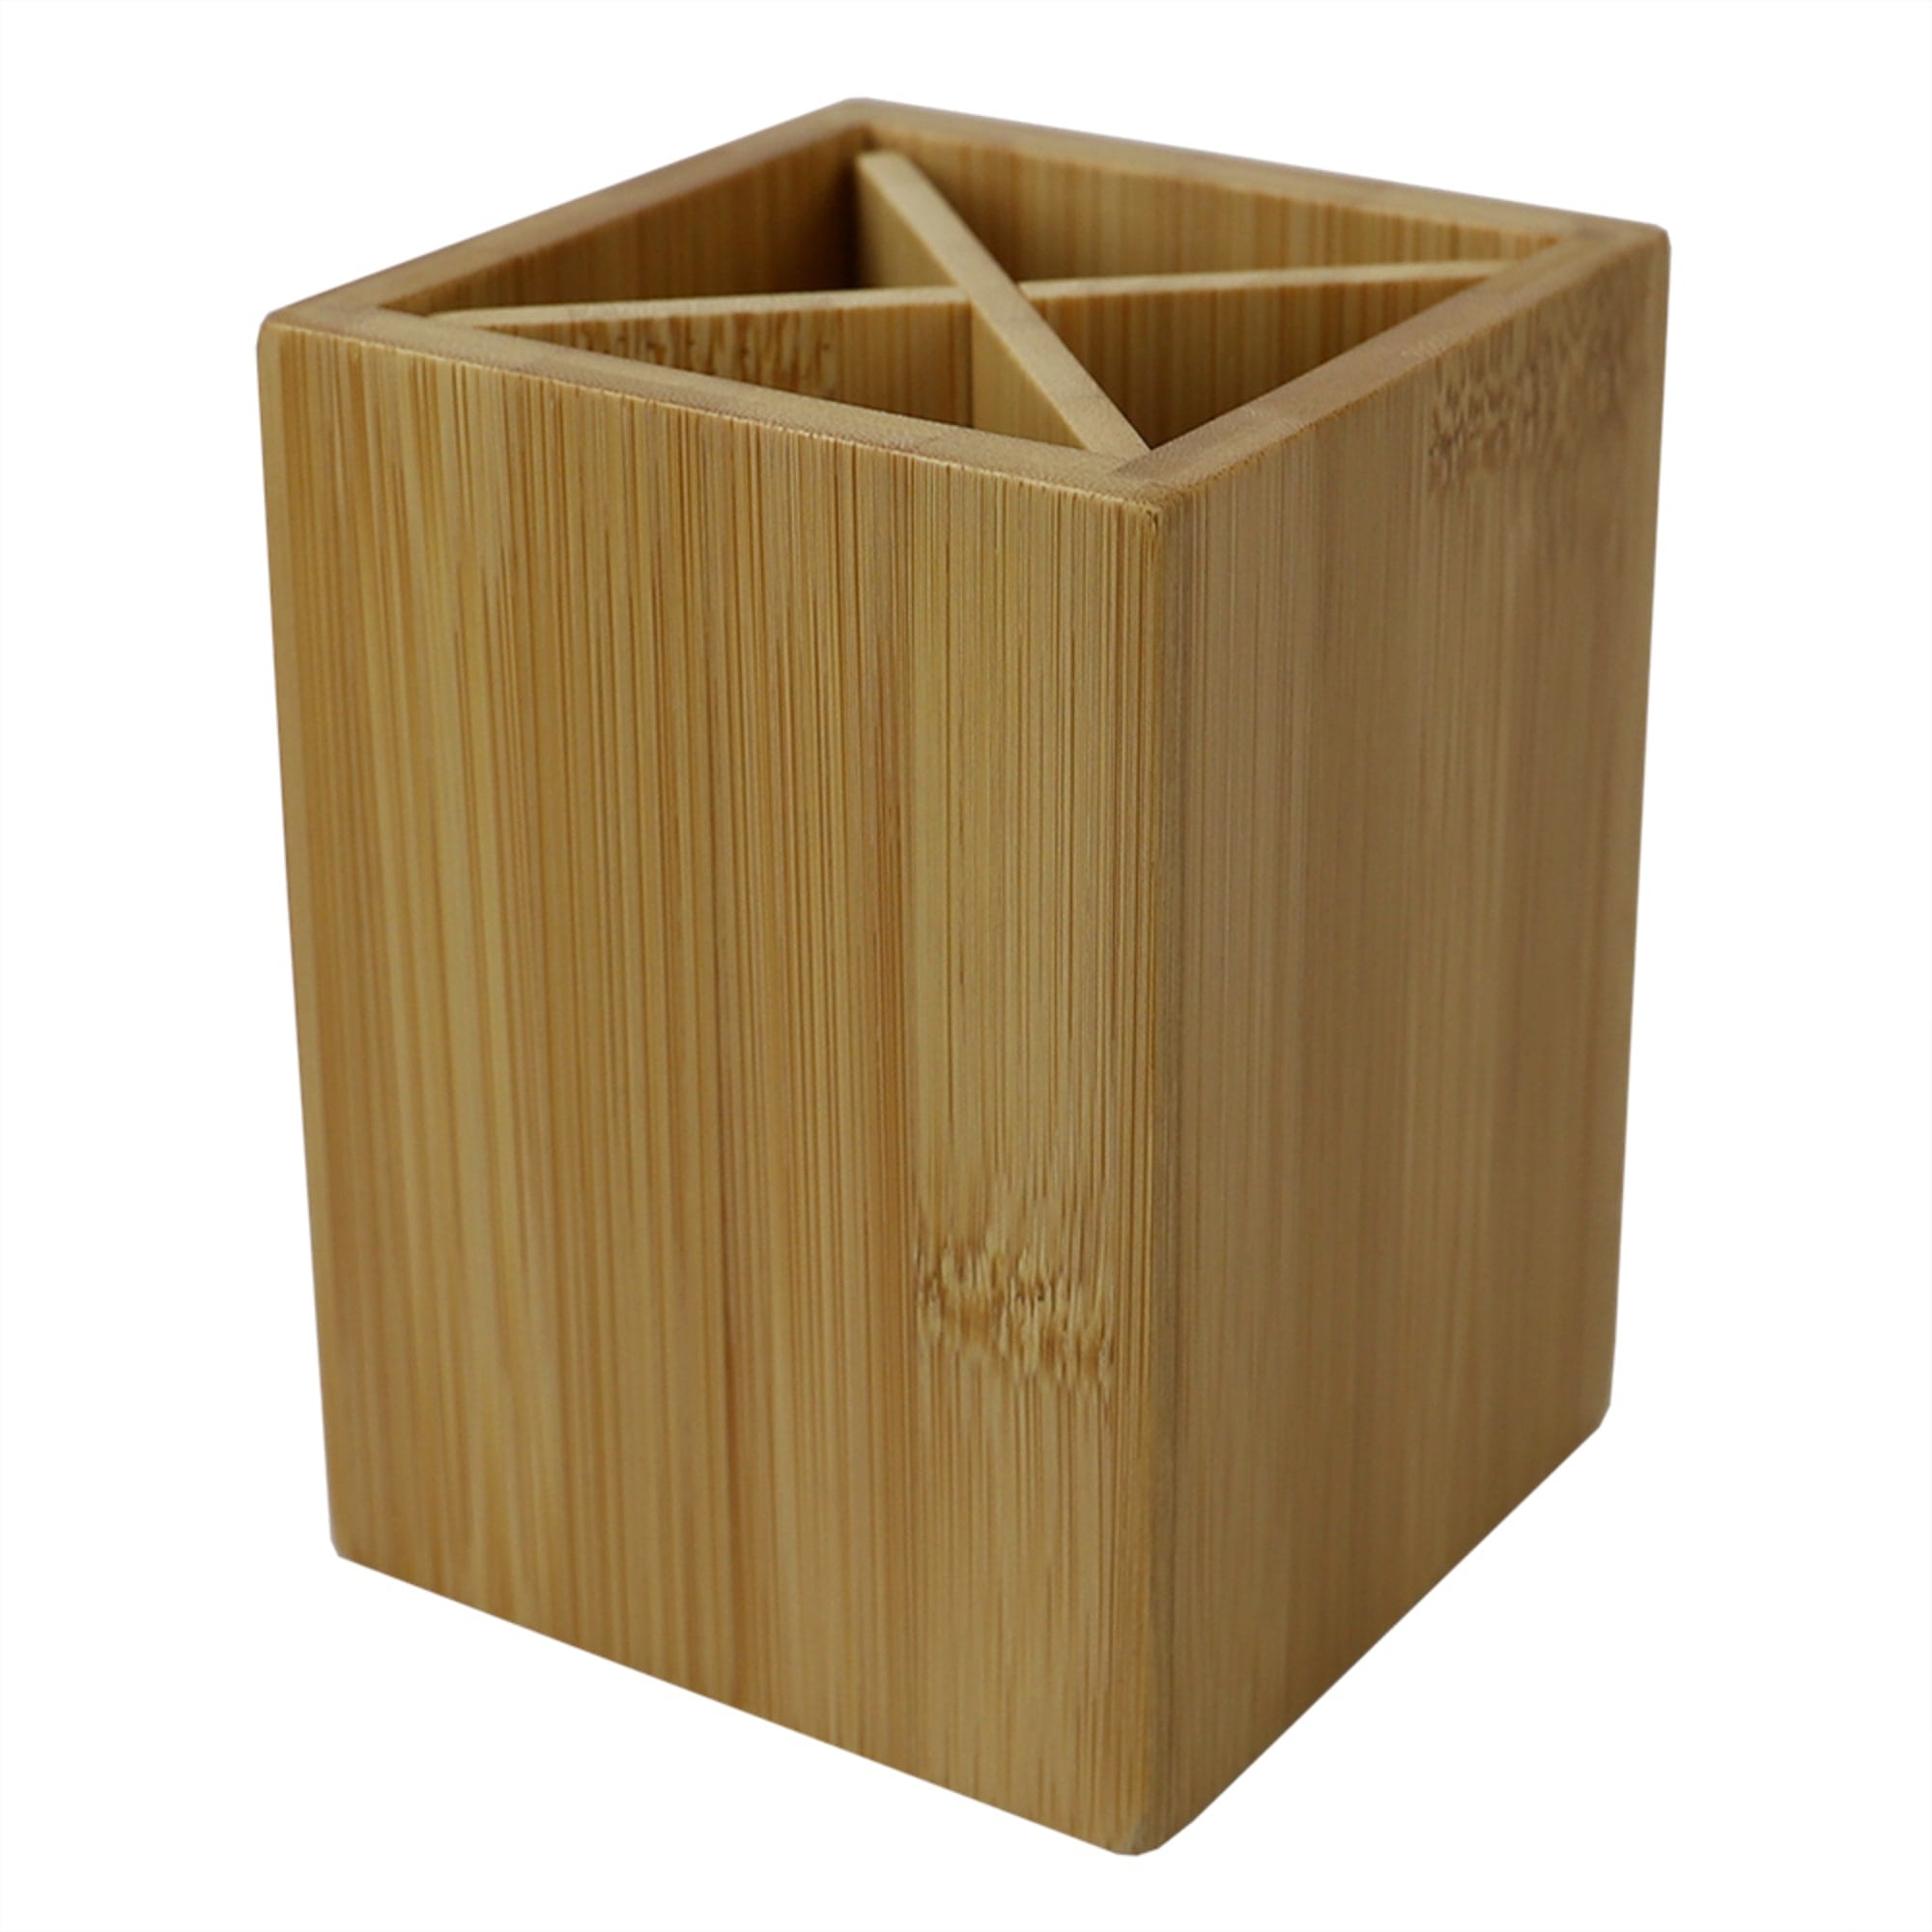 Home Basics 4 Section Square Bamboo Pen Holder, Natural $5 EACH, CASE PACK OF 6